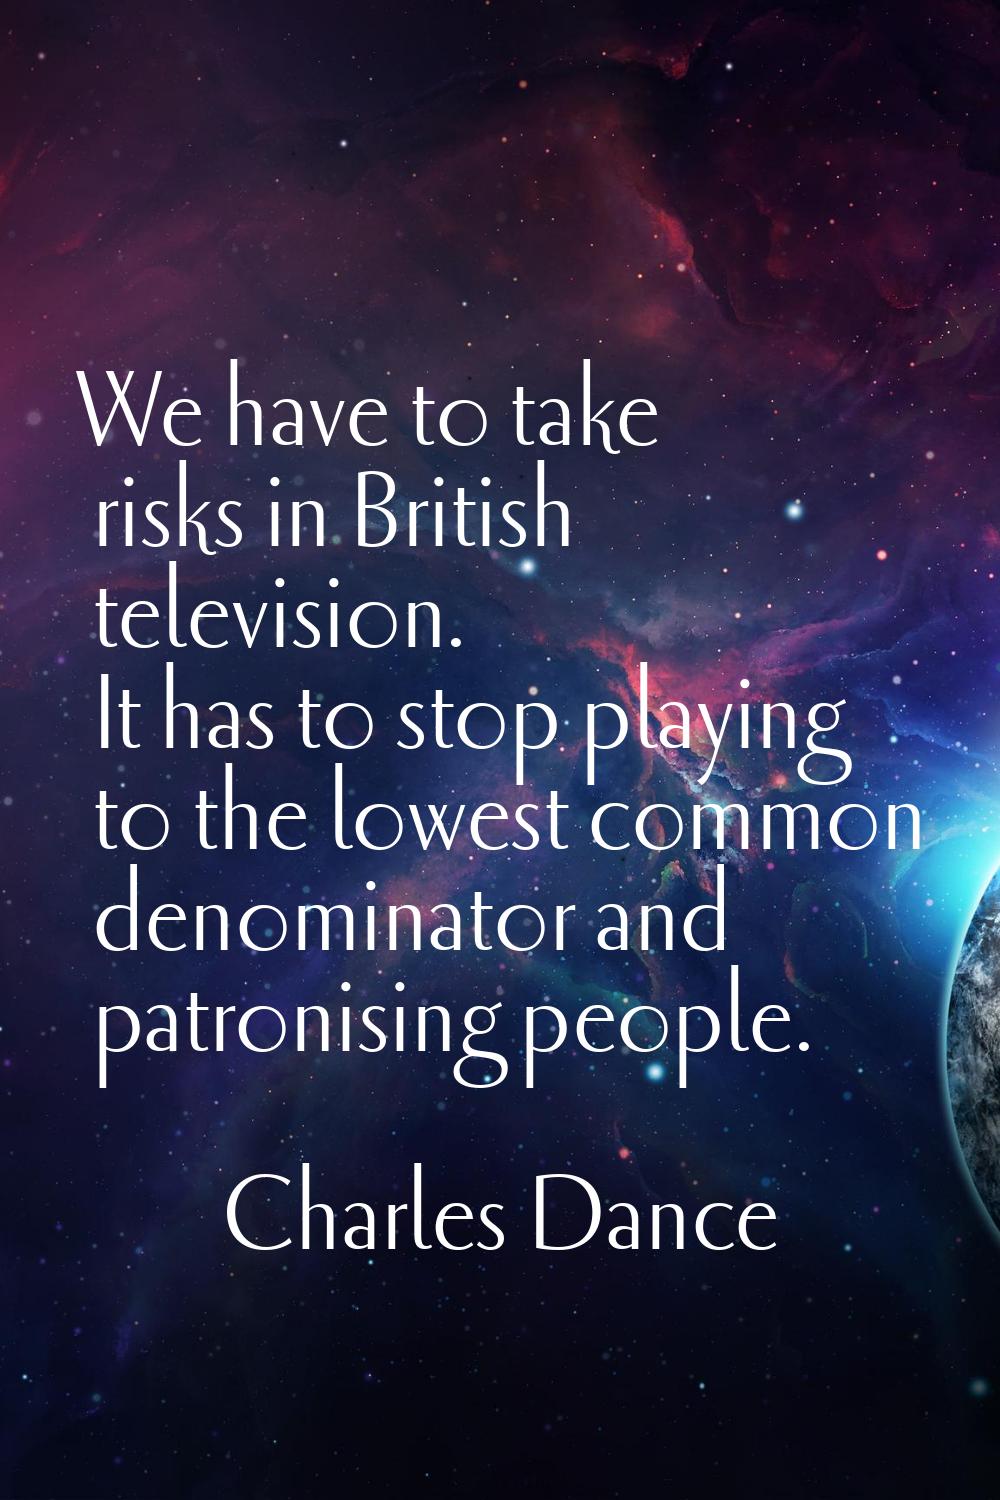 We have to take risks in British television. It has to stop playing to the lowest common denominato